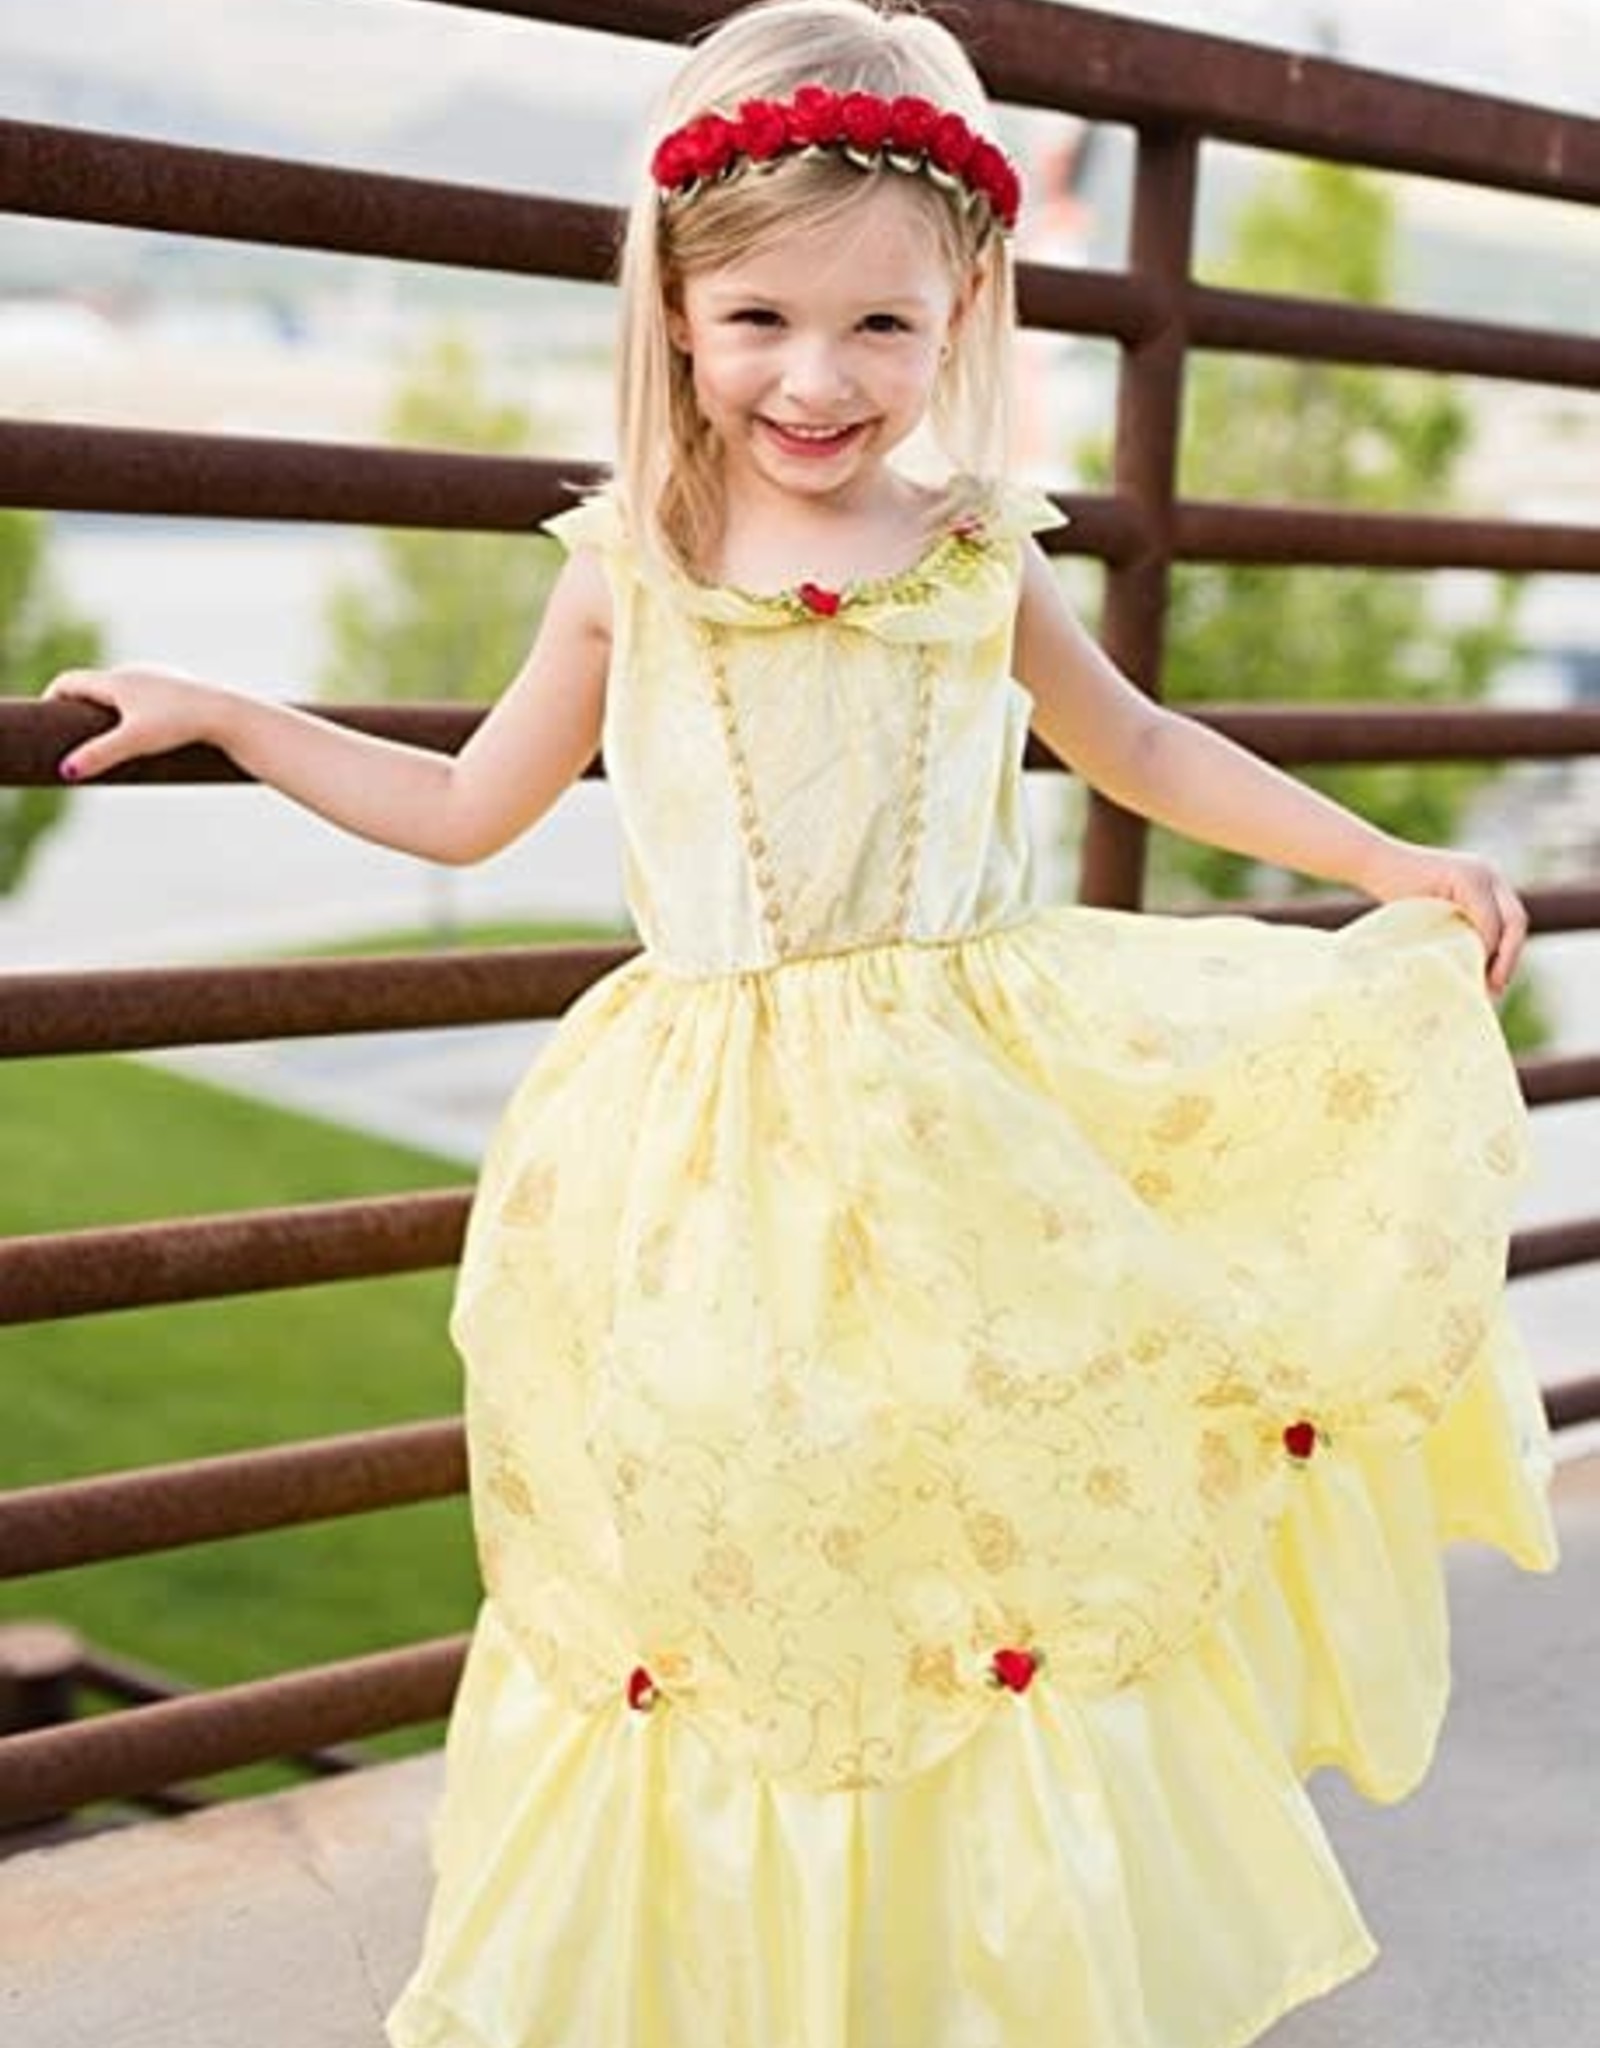 Little Adventures Yellow Beauty (Pg.3)5-7 YRS (L)